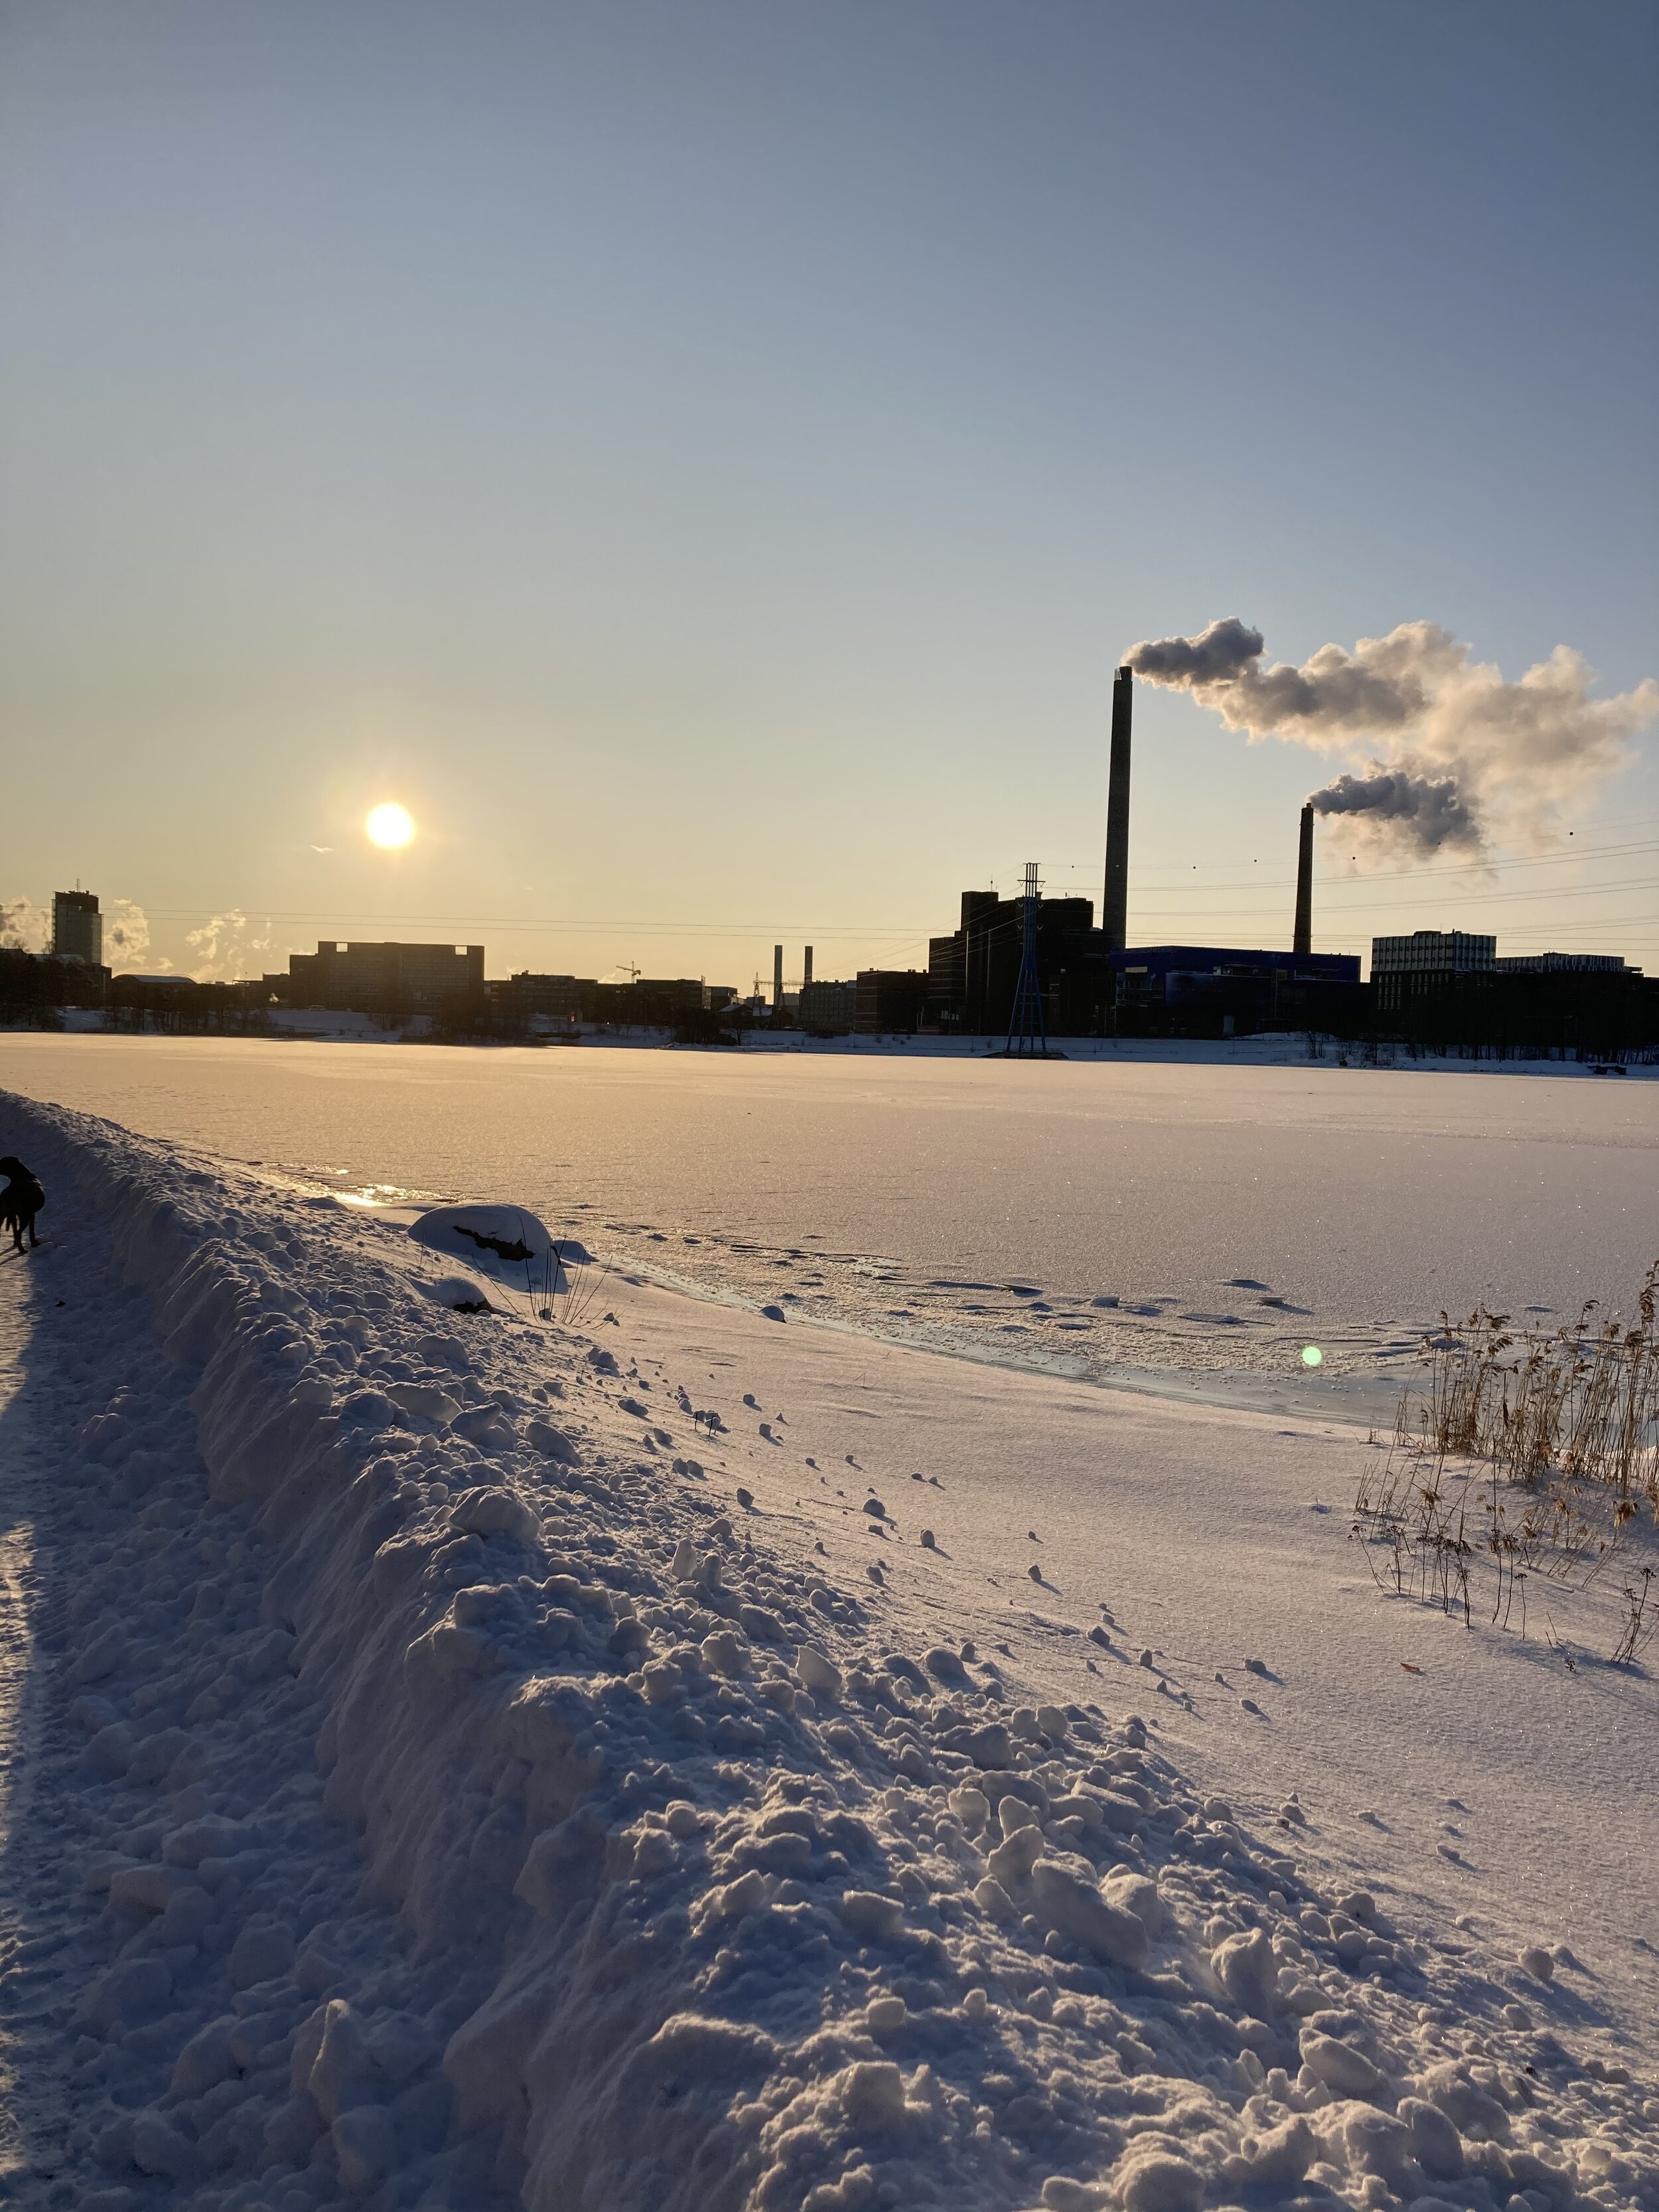 During Finnish winter, the sun doesn’t usually get much higher than this (when we see it that is).